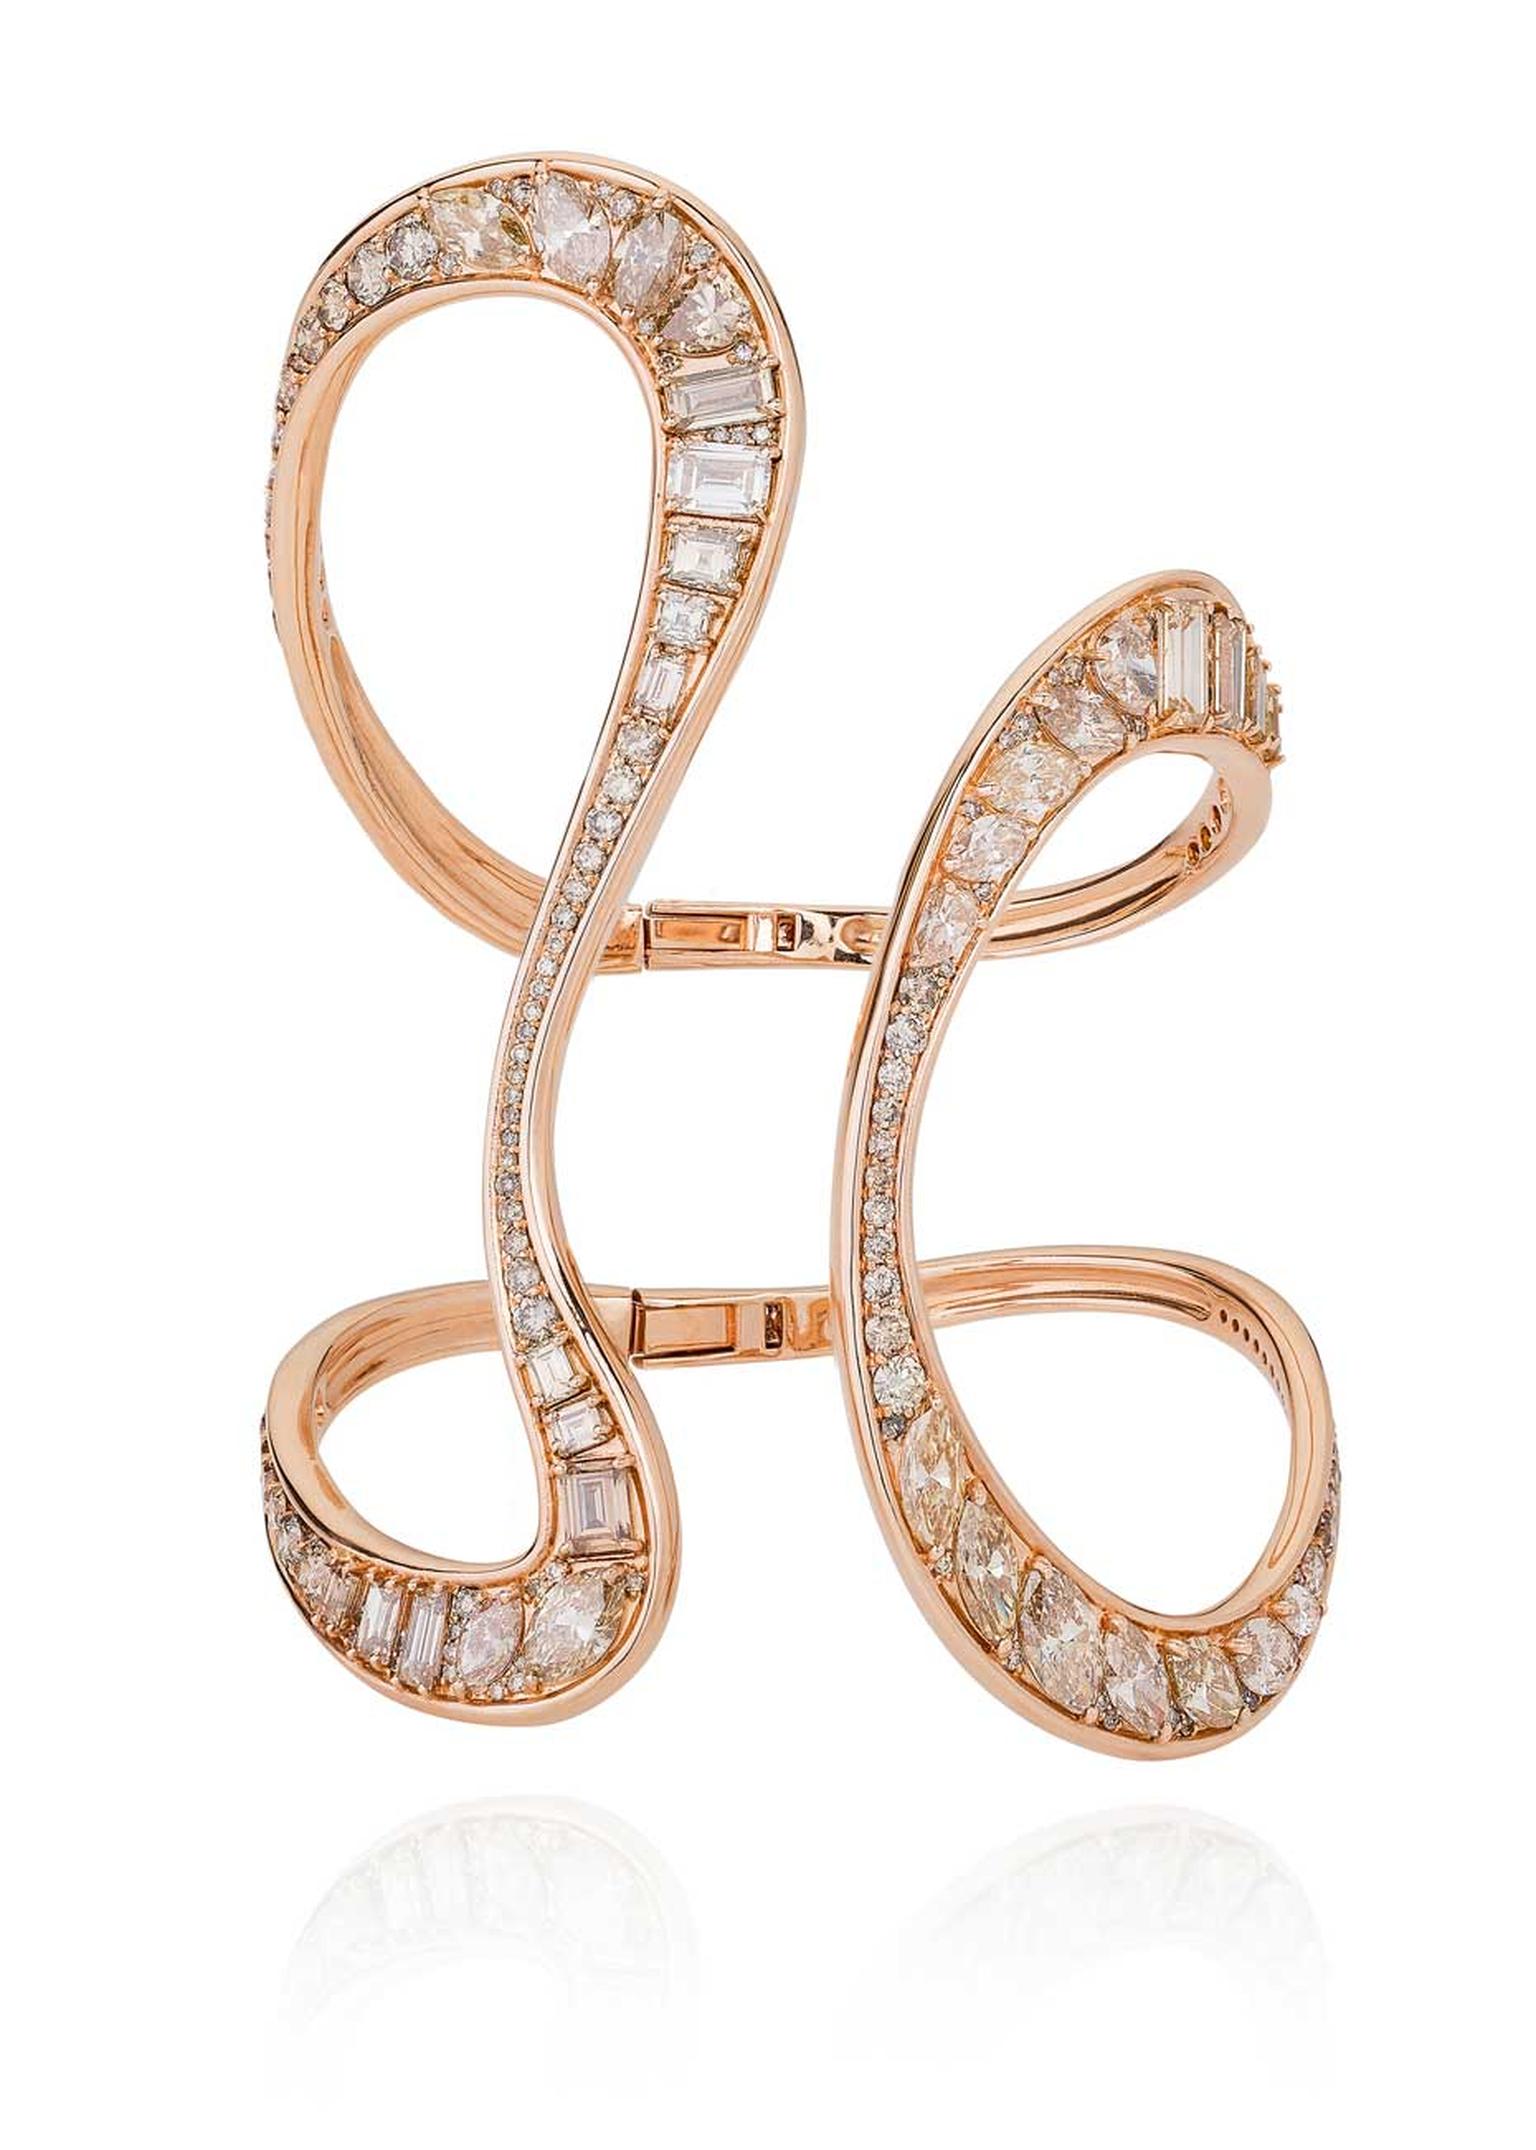 Fernando Jorge champagne diamond bracelet in rose gold, from the new Stream collection launching in February 2015.